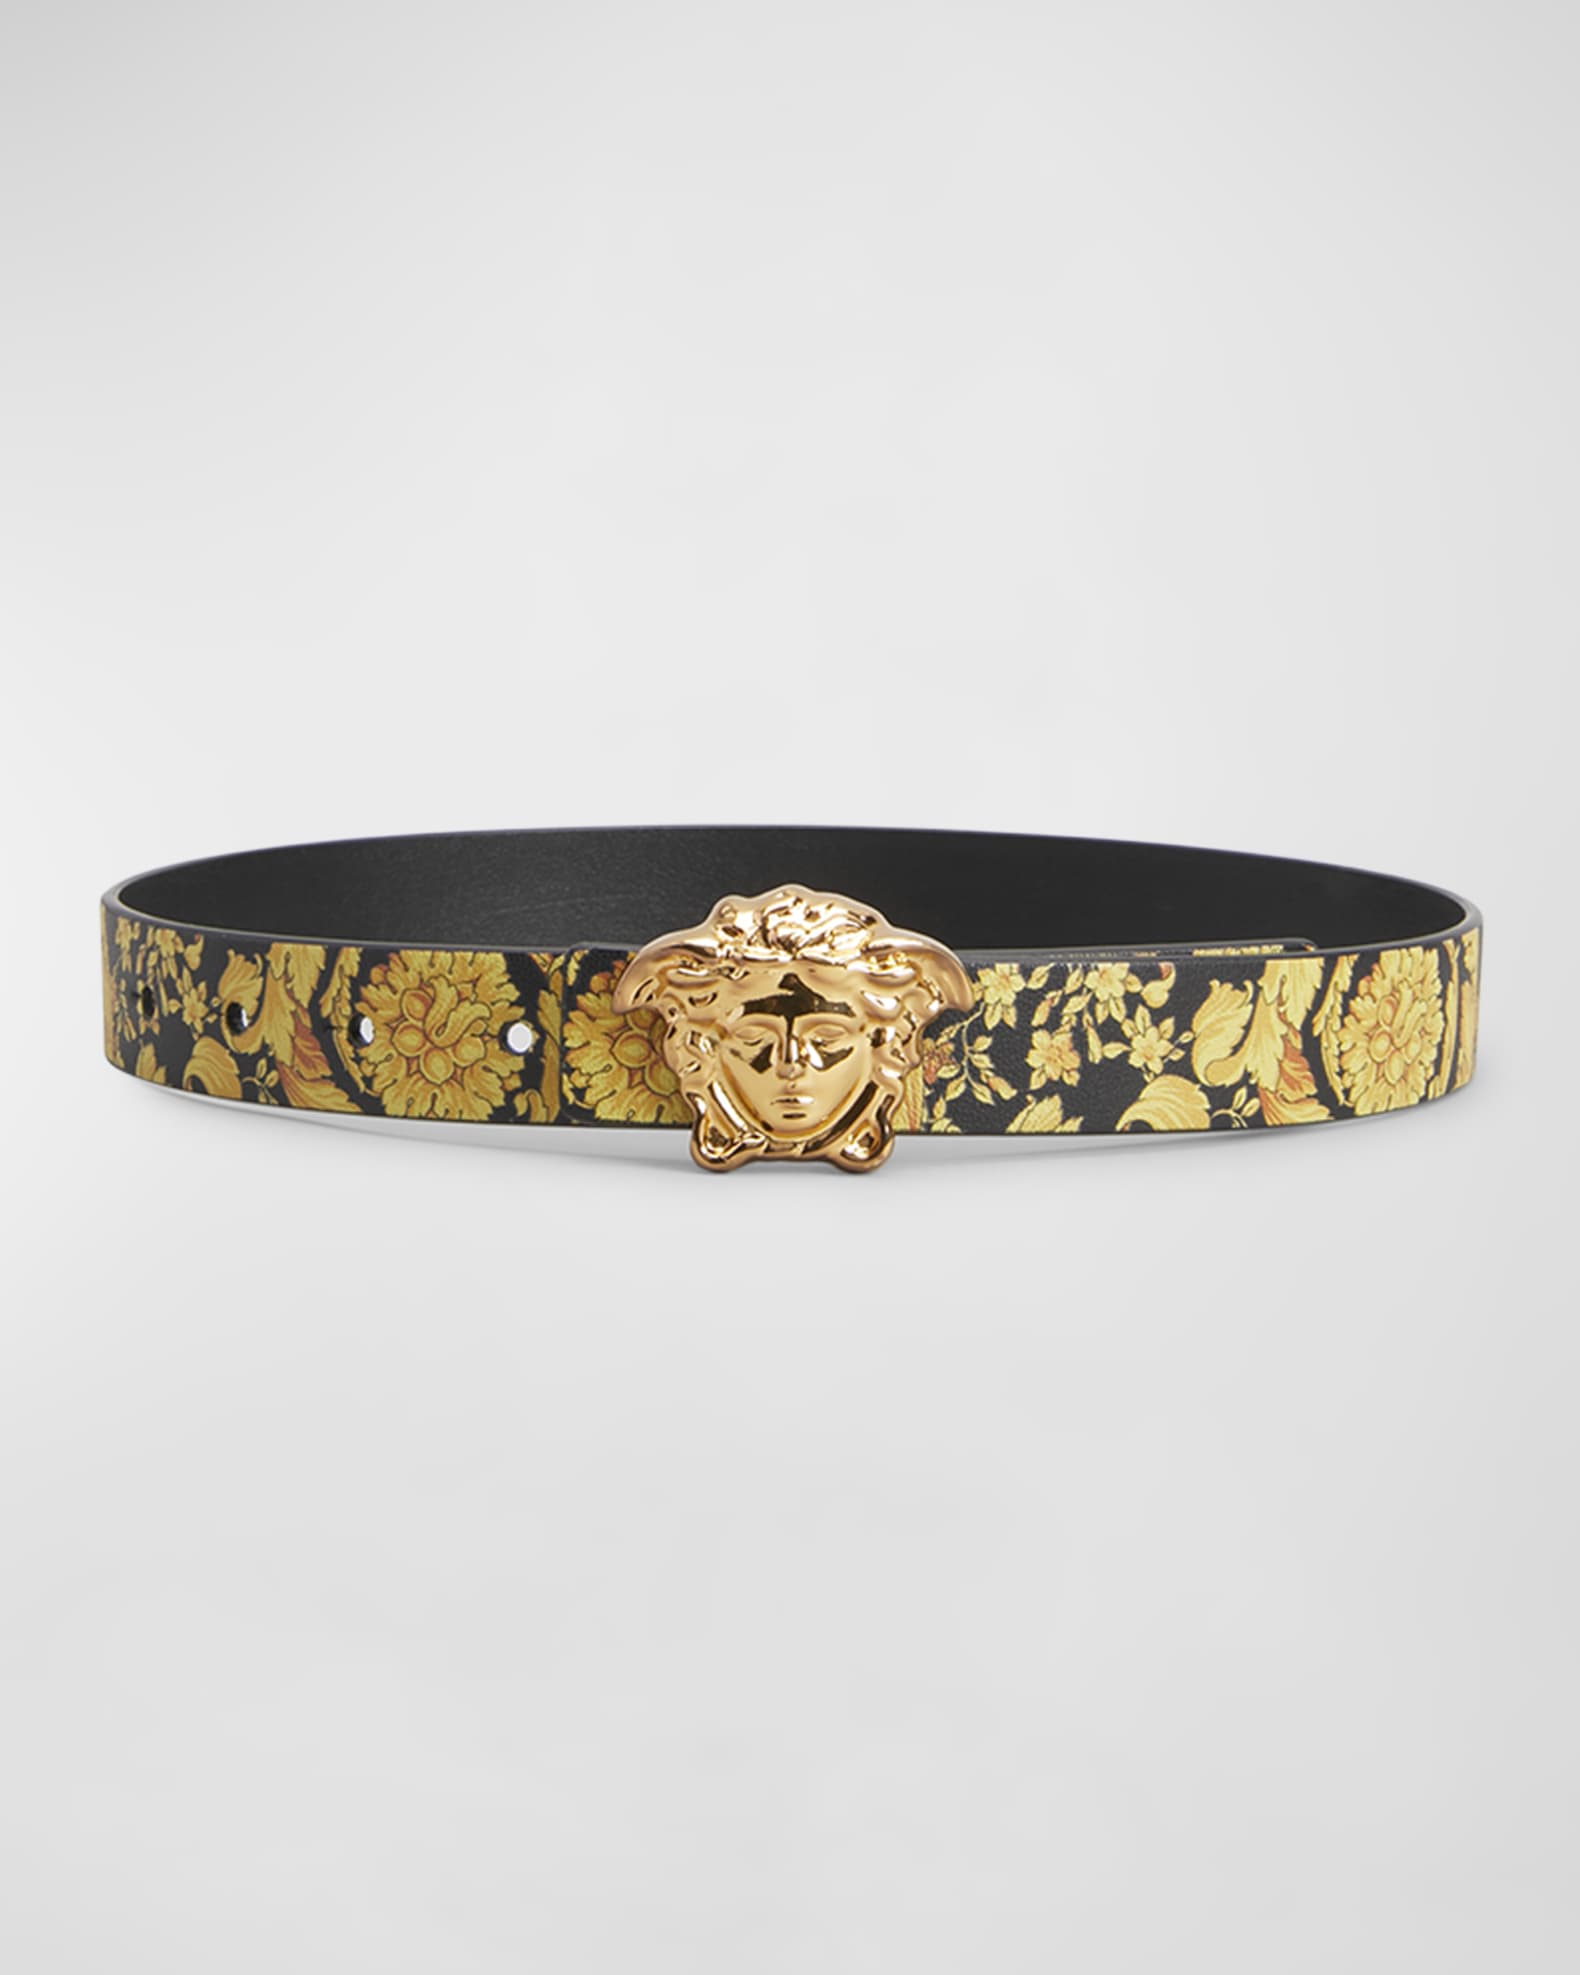 Accessorize with our Versace Reversible Barocco Medusa Belt